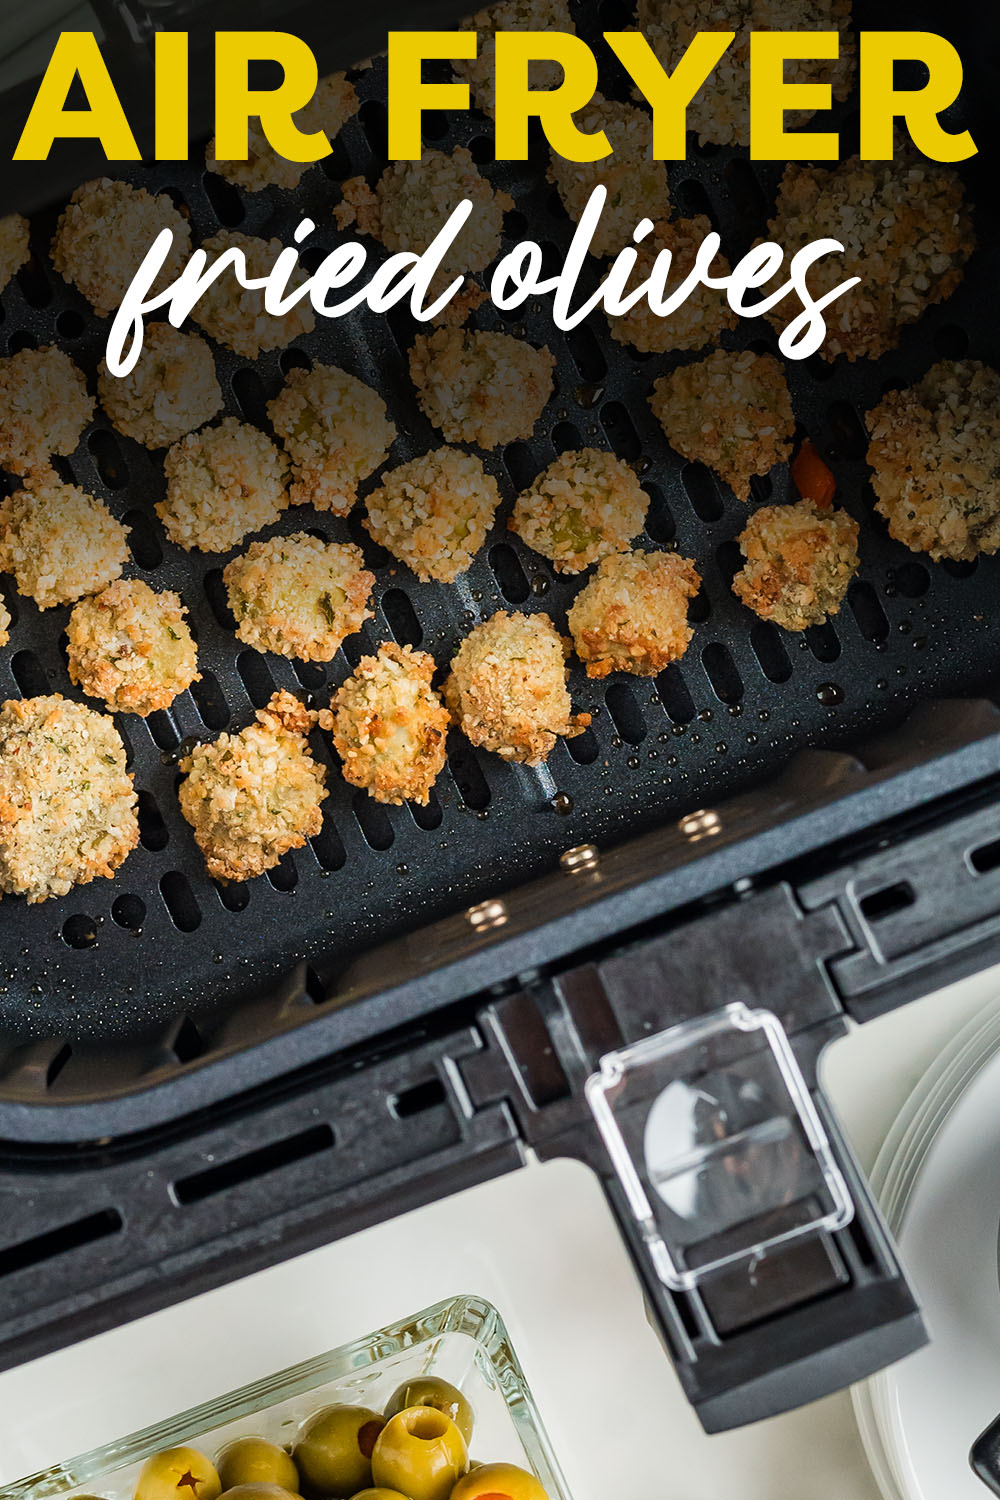 The best part of air fryer fried olives is their crispy coating combined with the flavorful filling of briny, salty olives., but keeping the clean up really easy!